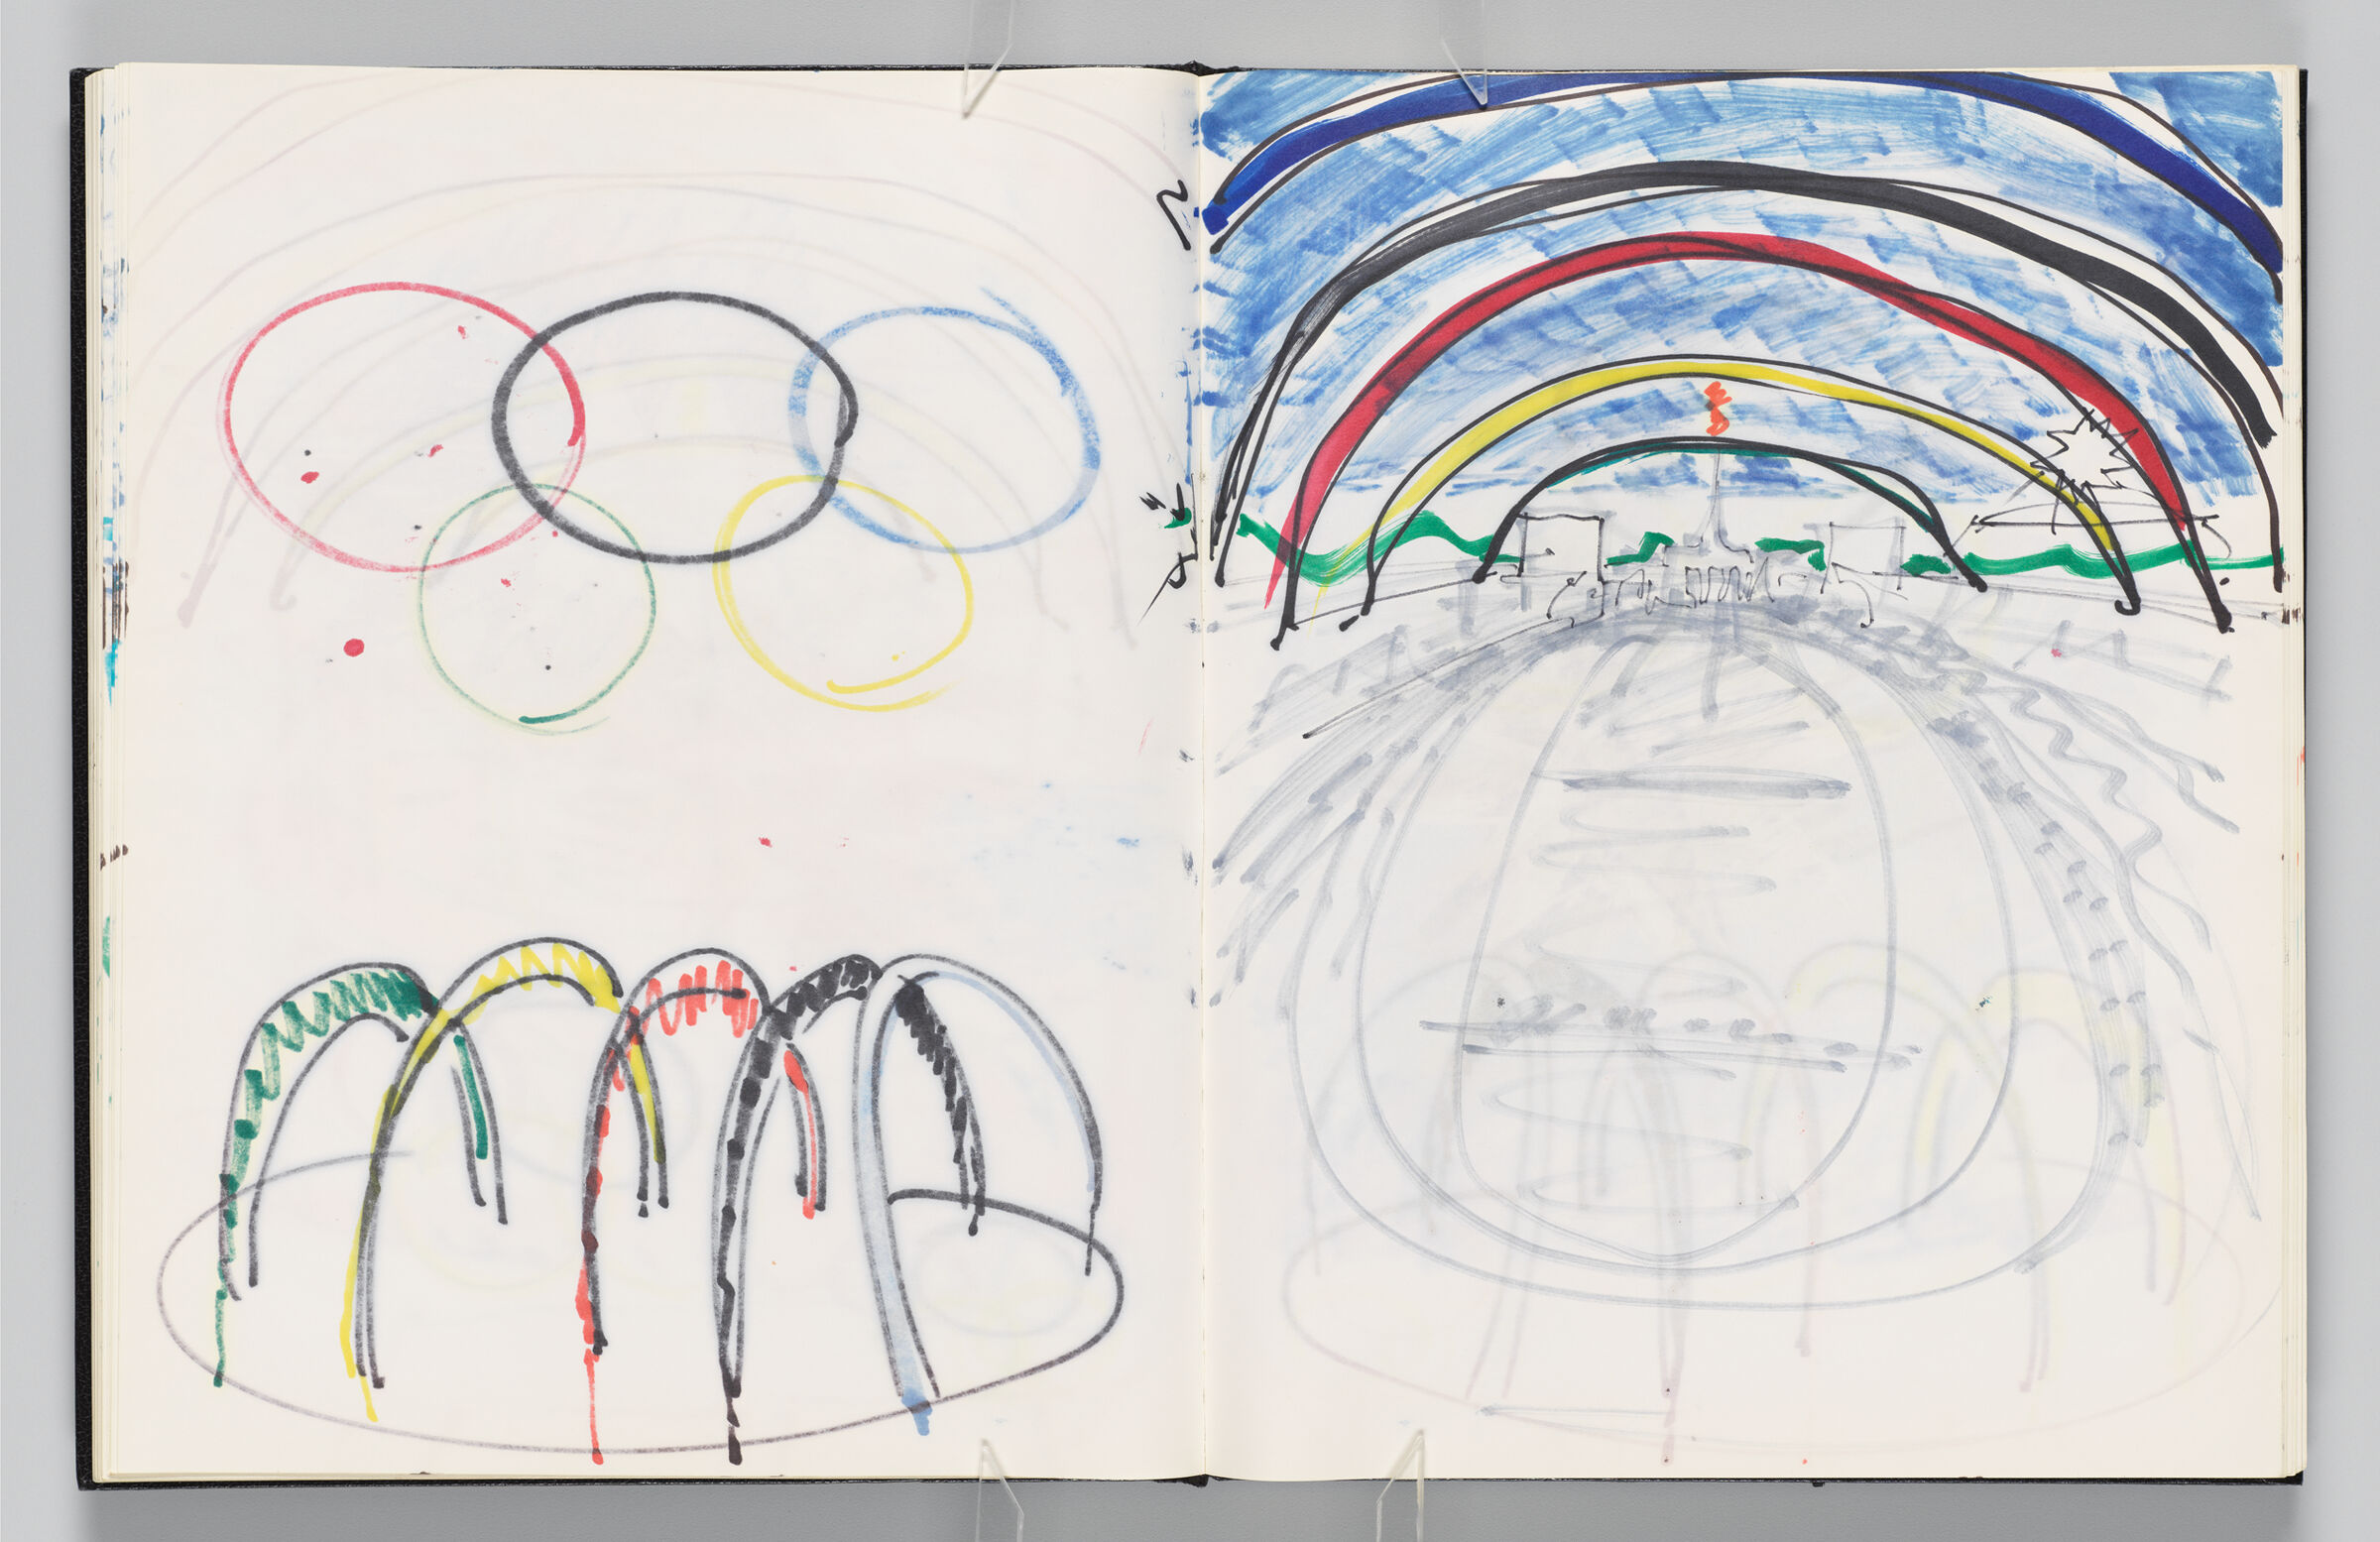 Untitled (Bleed-Through Of Previous Page, Left Page); Untitled (Rainbows Over L.a. Memorial Coliseum, Right Page)